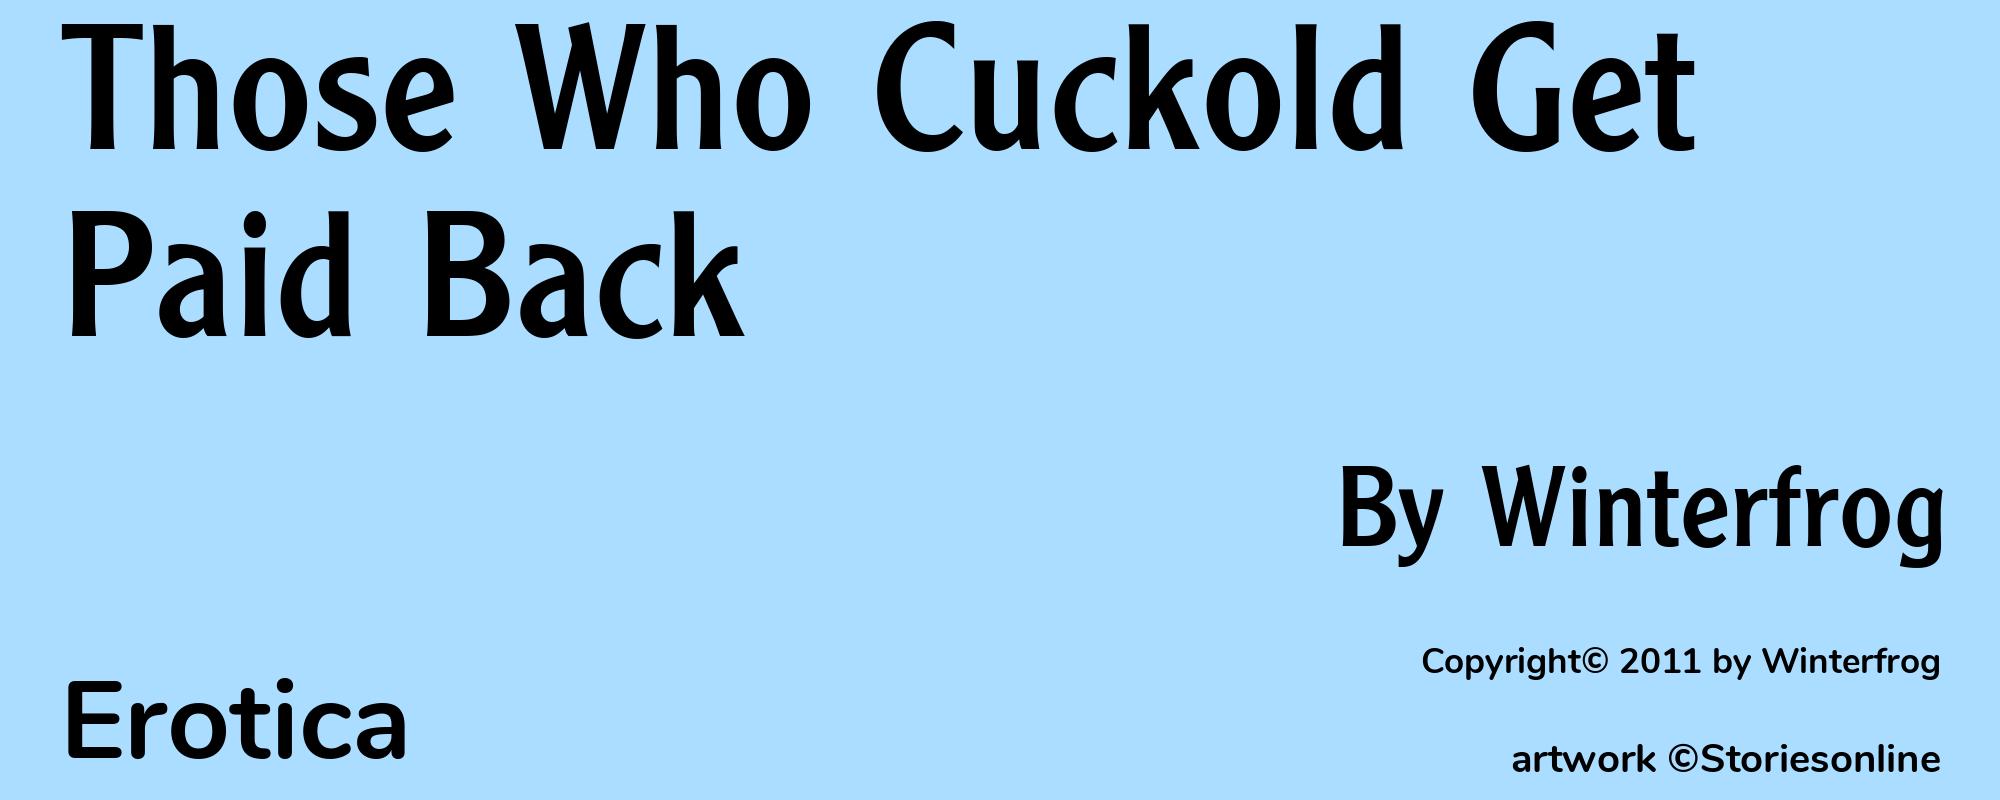 Those Who Cuckold Get Paid Back - Cover